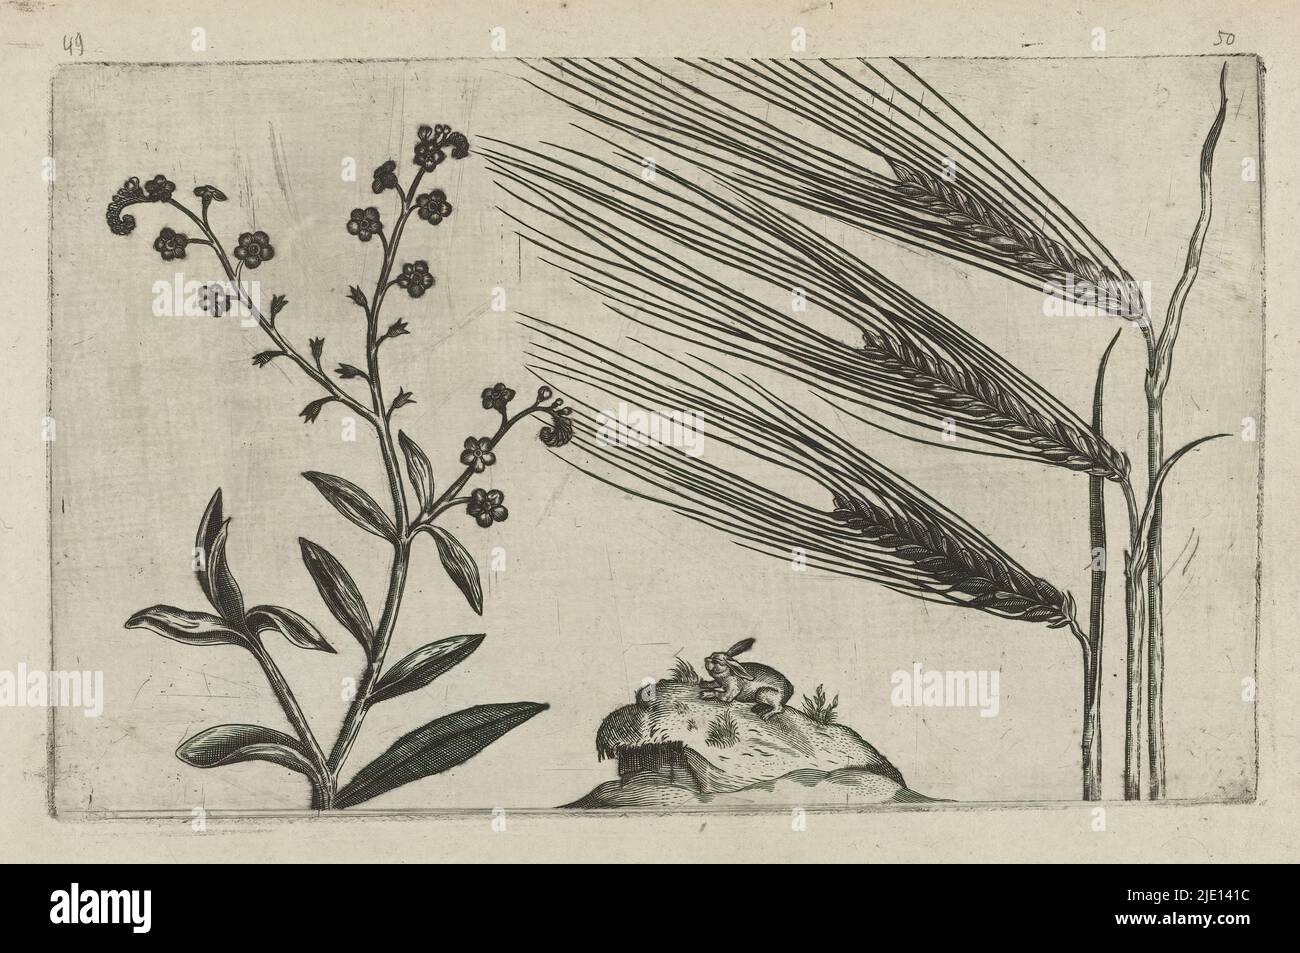 Swamp forget-me-not and barley, Cognoscite lilia (series title), Swamp forget-me-not (Myosotis scorpioides) and barley (Hordeum vulgare), unnumbered., print maker: Crispijn van de Passe (I), (attributed to), after drawing by: Crispijn van de Passe (I), (attributed to), publisher: Crispijn van de Passe (I), print maker: Cologne, after drawing by: Cologne, publisher: Cologne, publisher: London, 1600 - 1604, paper, engraving, height 127 mm × width 205 mm, height 172 mm × width 272 mm Stock Photo